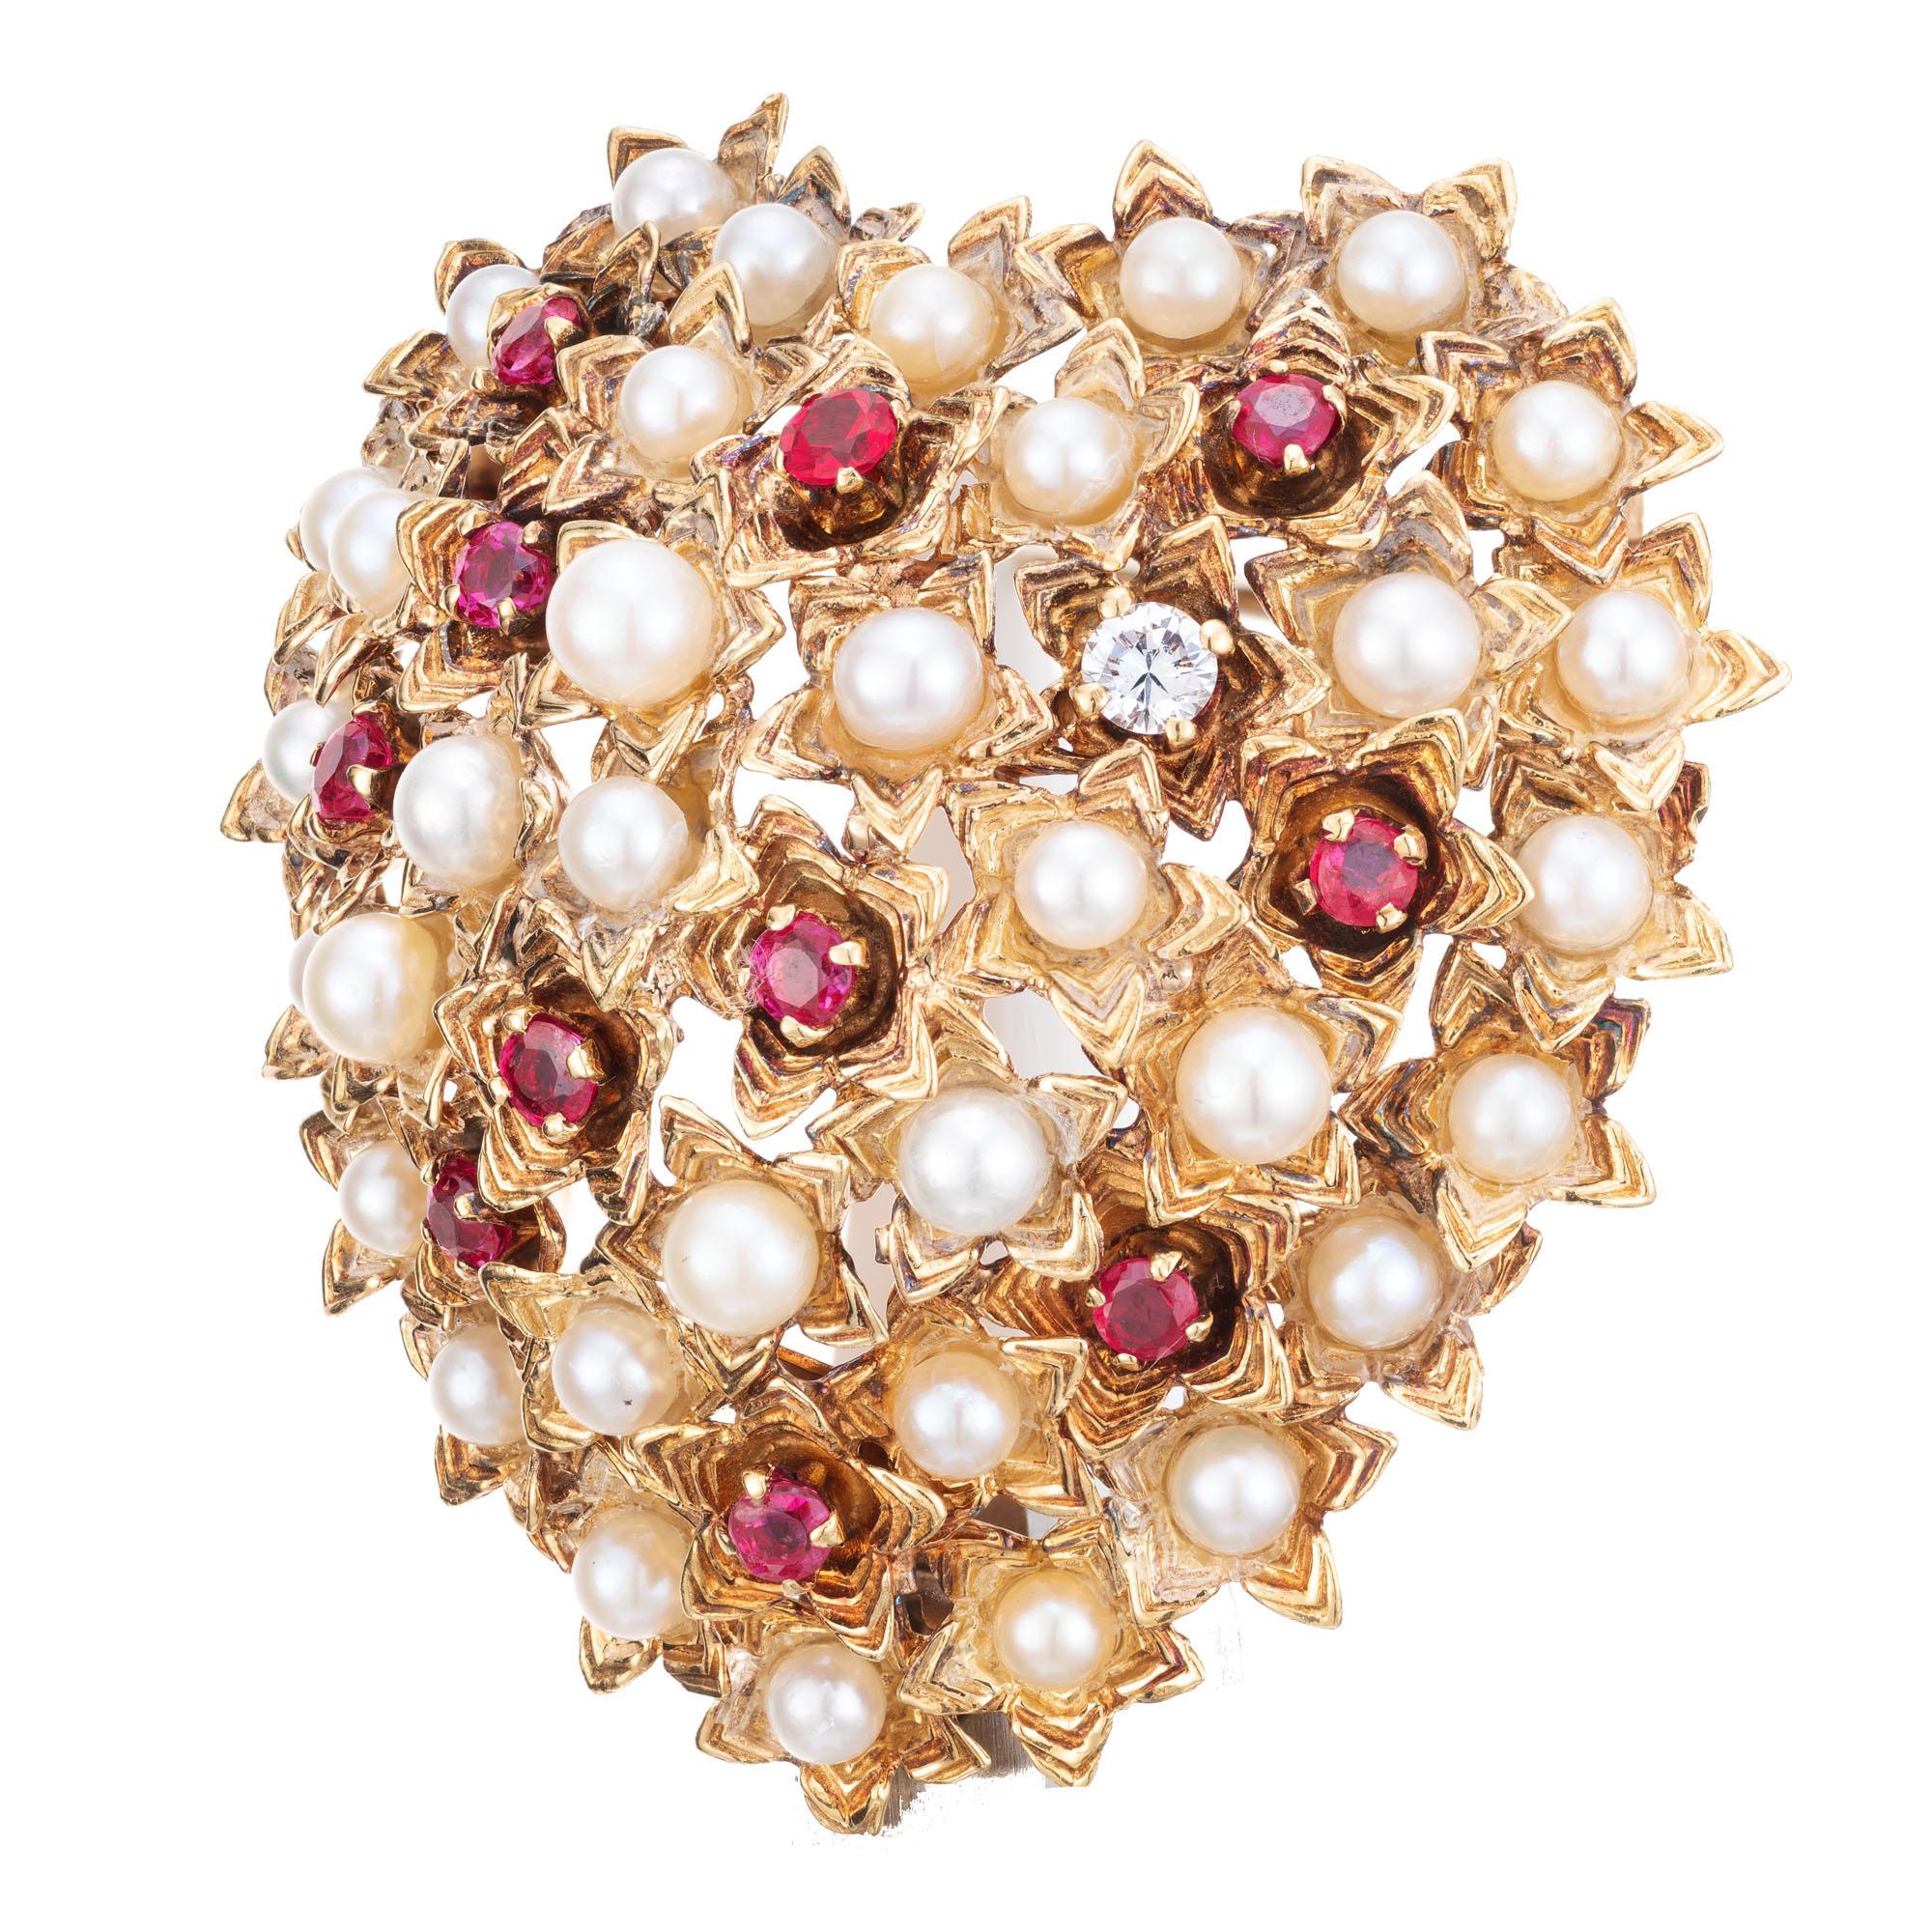 1950's Authentic Tiffany + Co, Ruby, diamond and Akoya pearls set in 18k yellow gold, Italian made domed heart shaped brooch.  

1 round diamond approx. weight .07cts. 
11 round rubies approx. total weight 1.65cts
35 round Akoya pearls 1 1/2 by 1